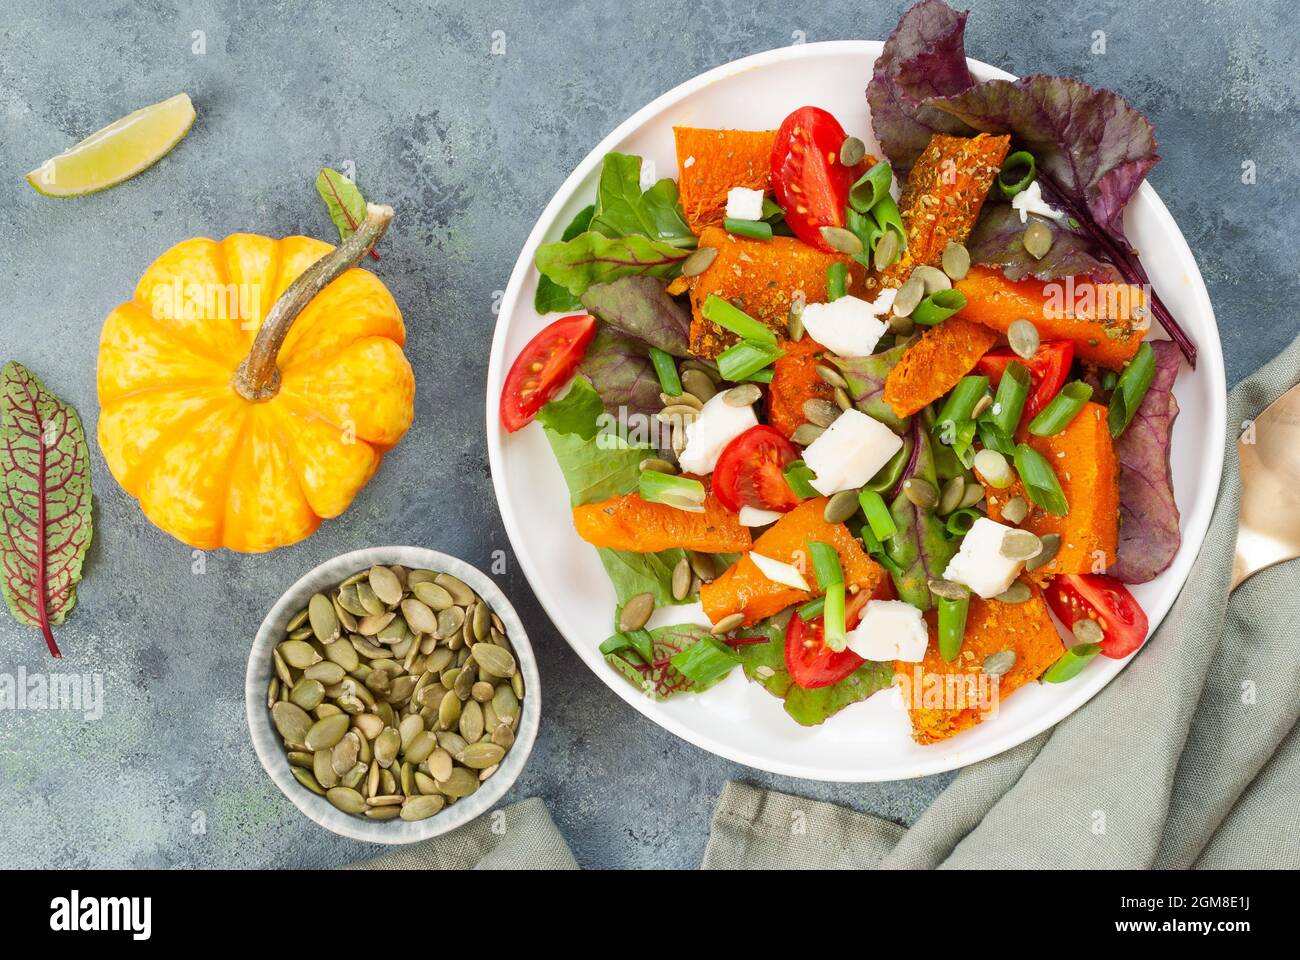 Pumpkin salad with cheese, tomatoes and pumpkin seeds Stock Photo